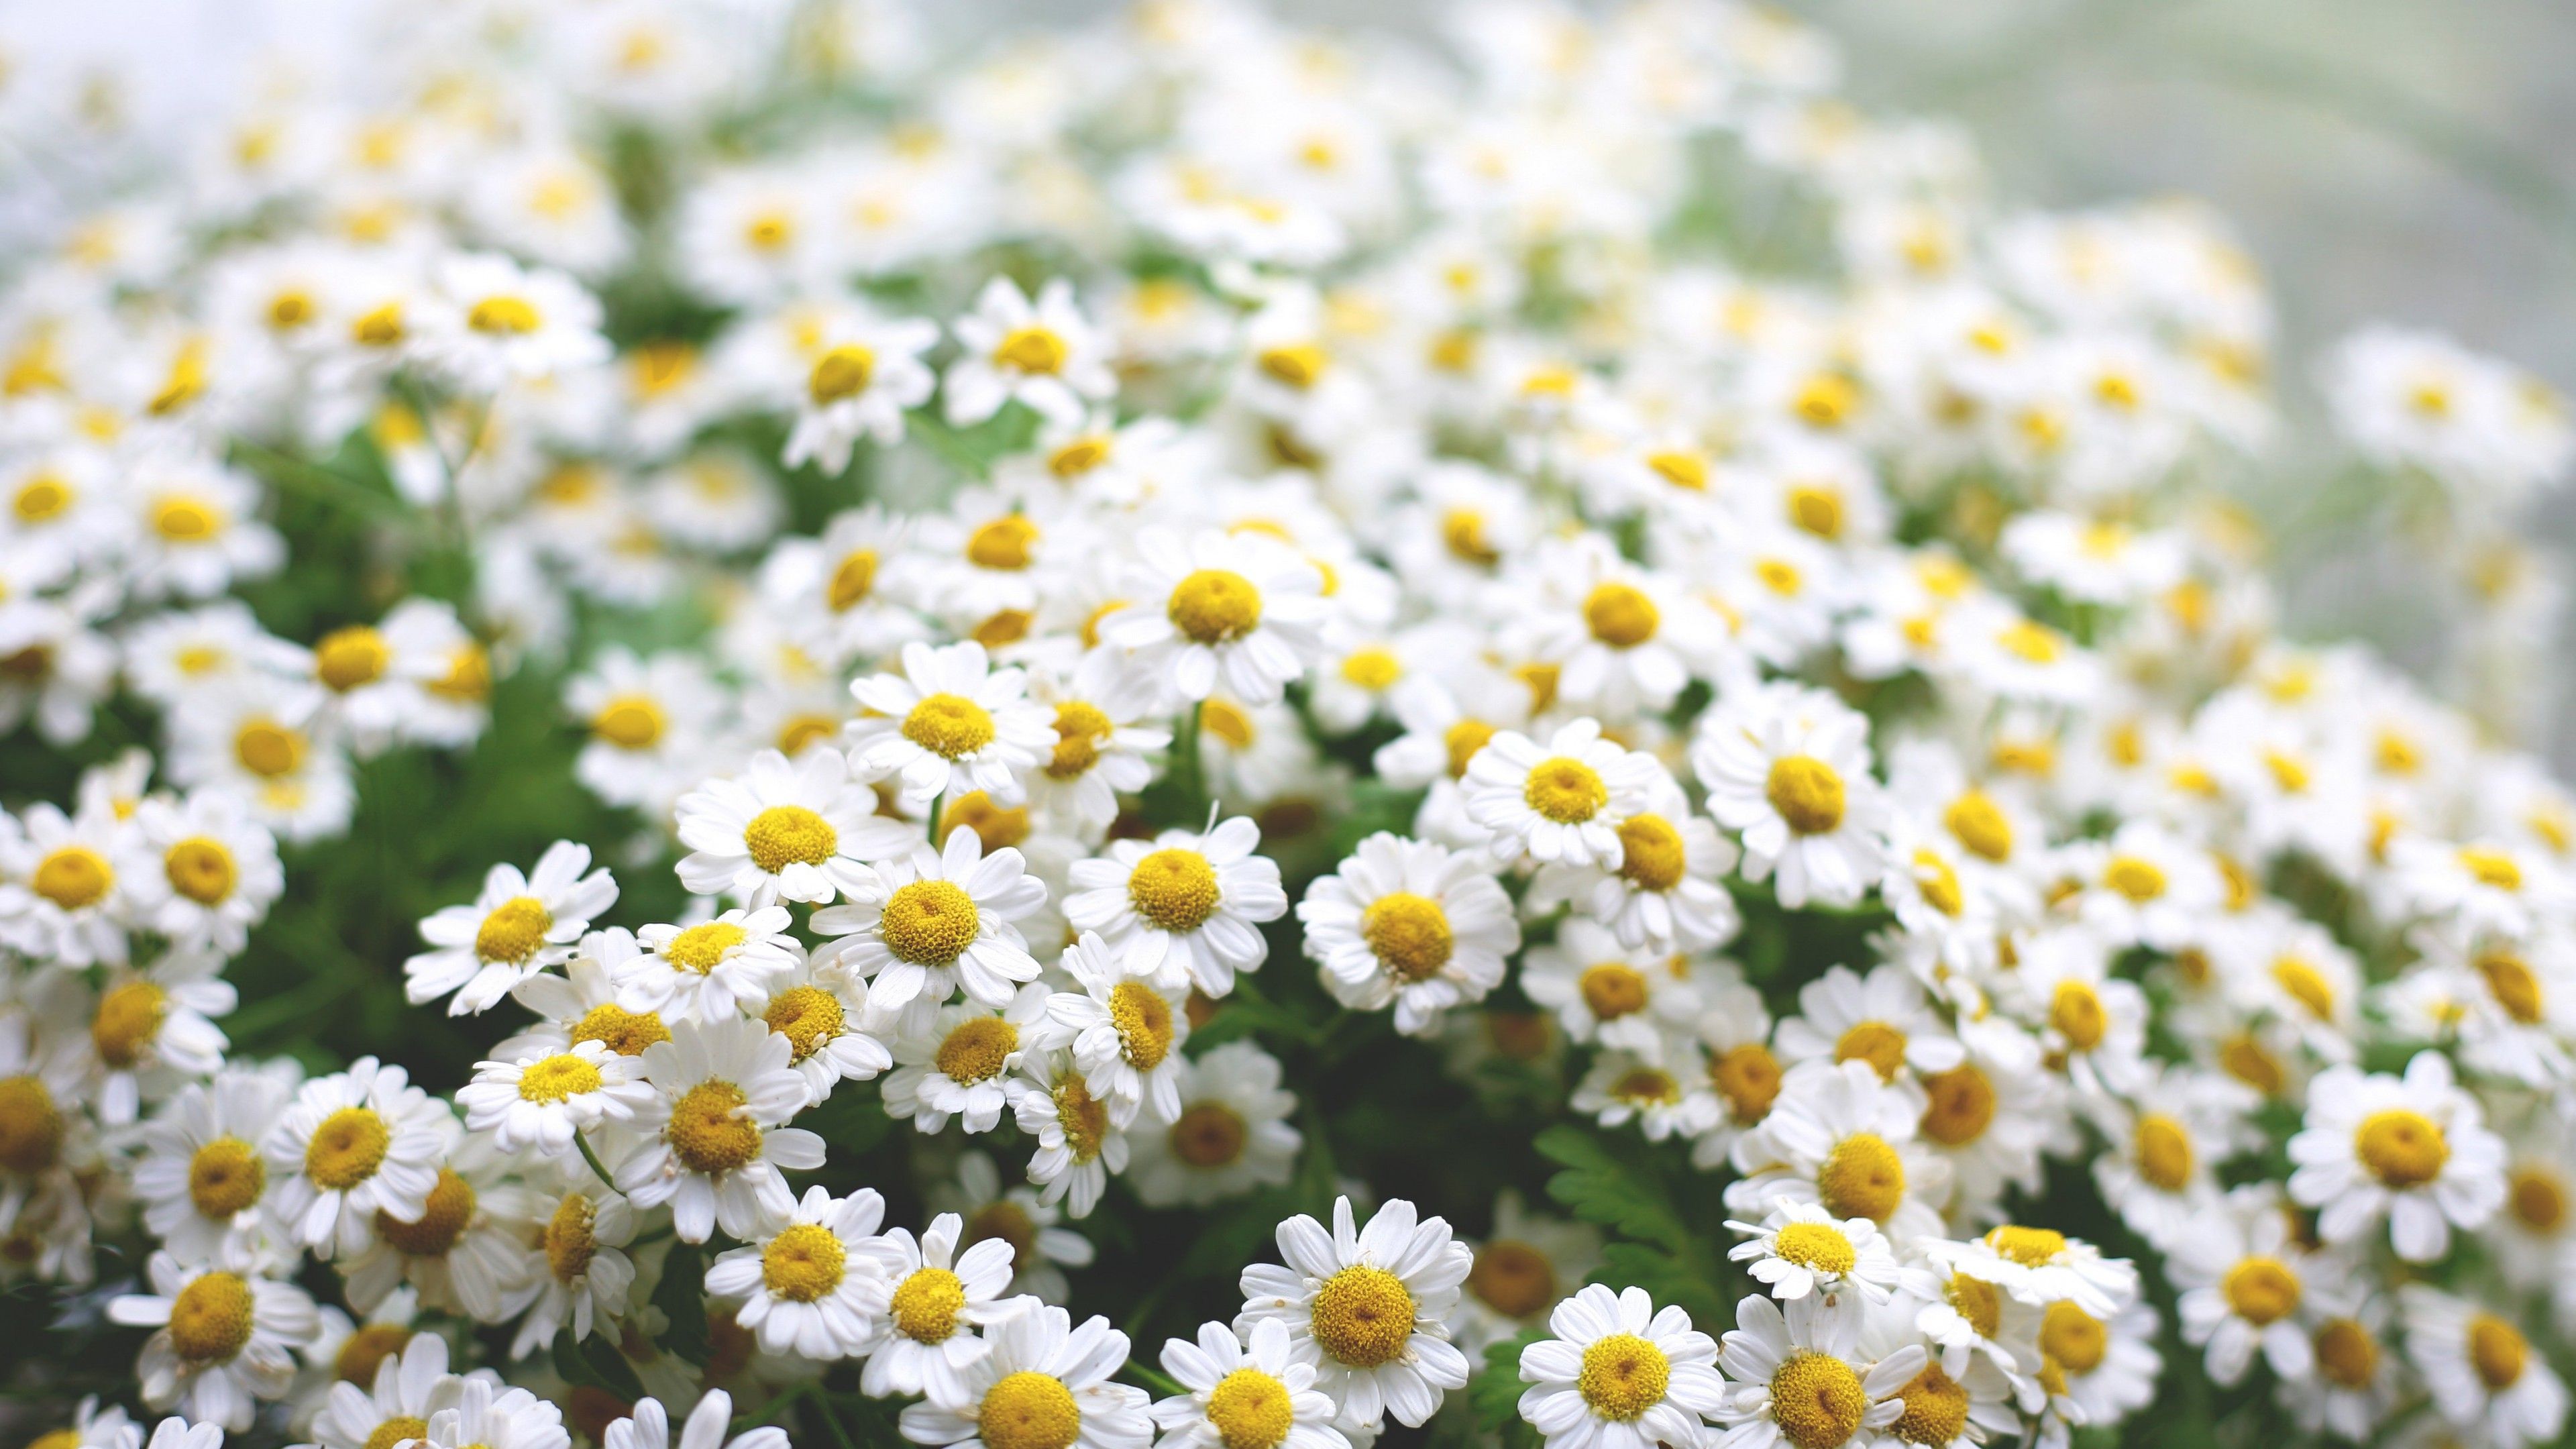 A close up of white and yellow flowers - Spring, daisy